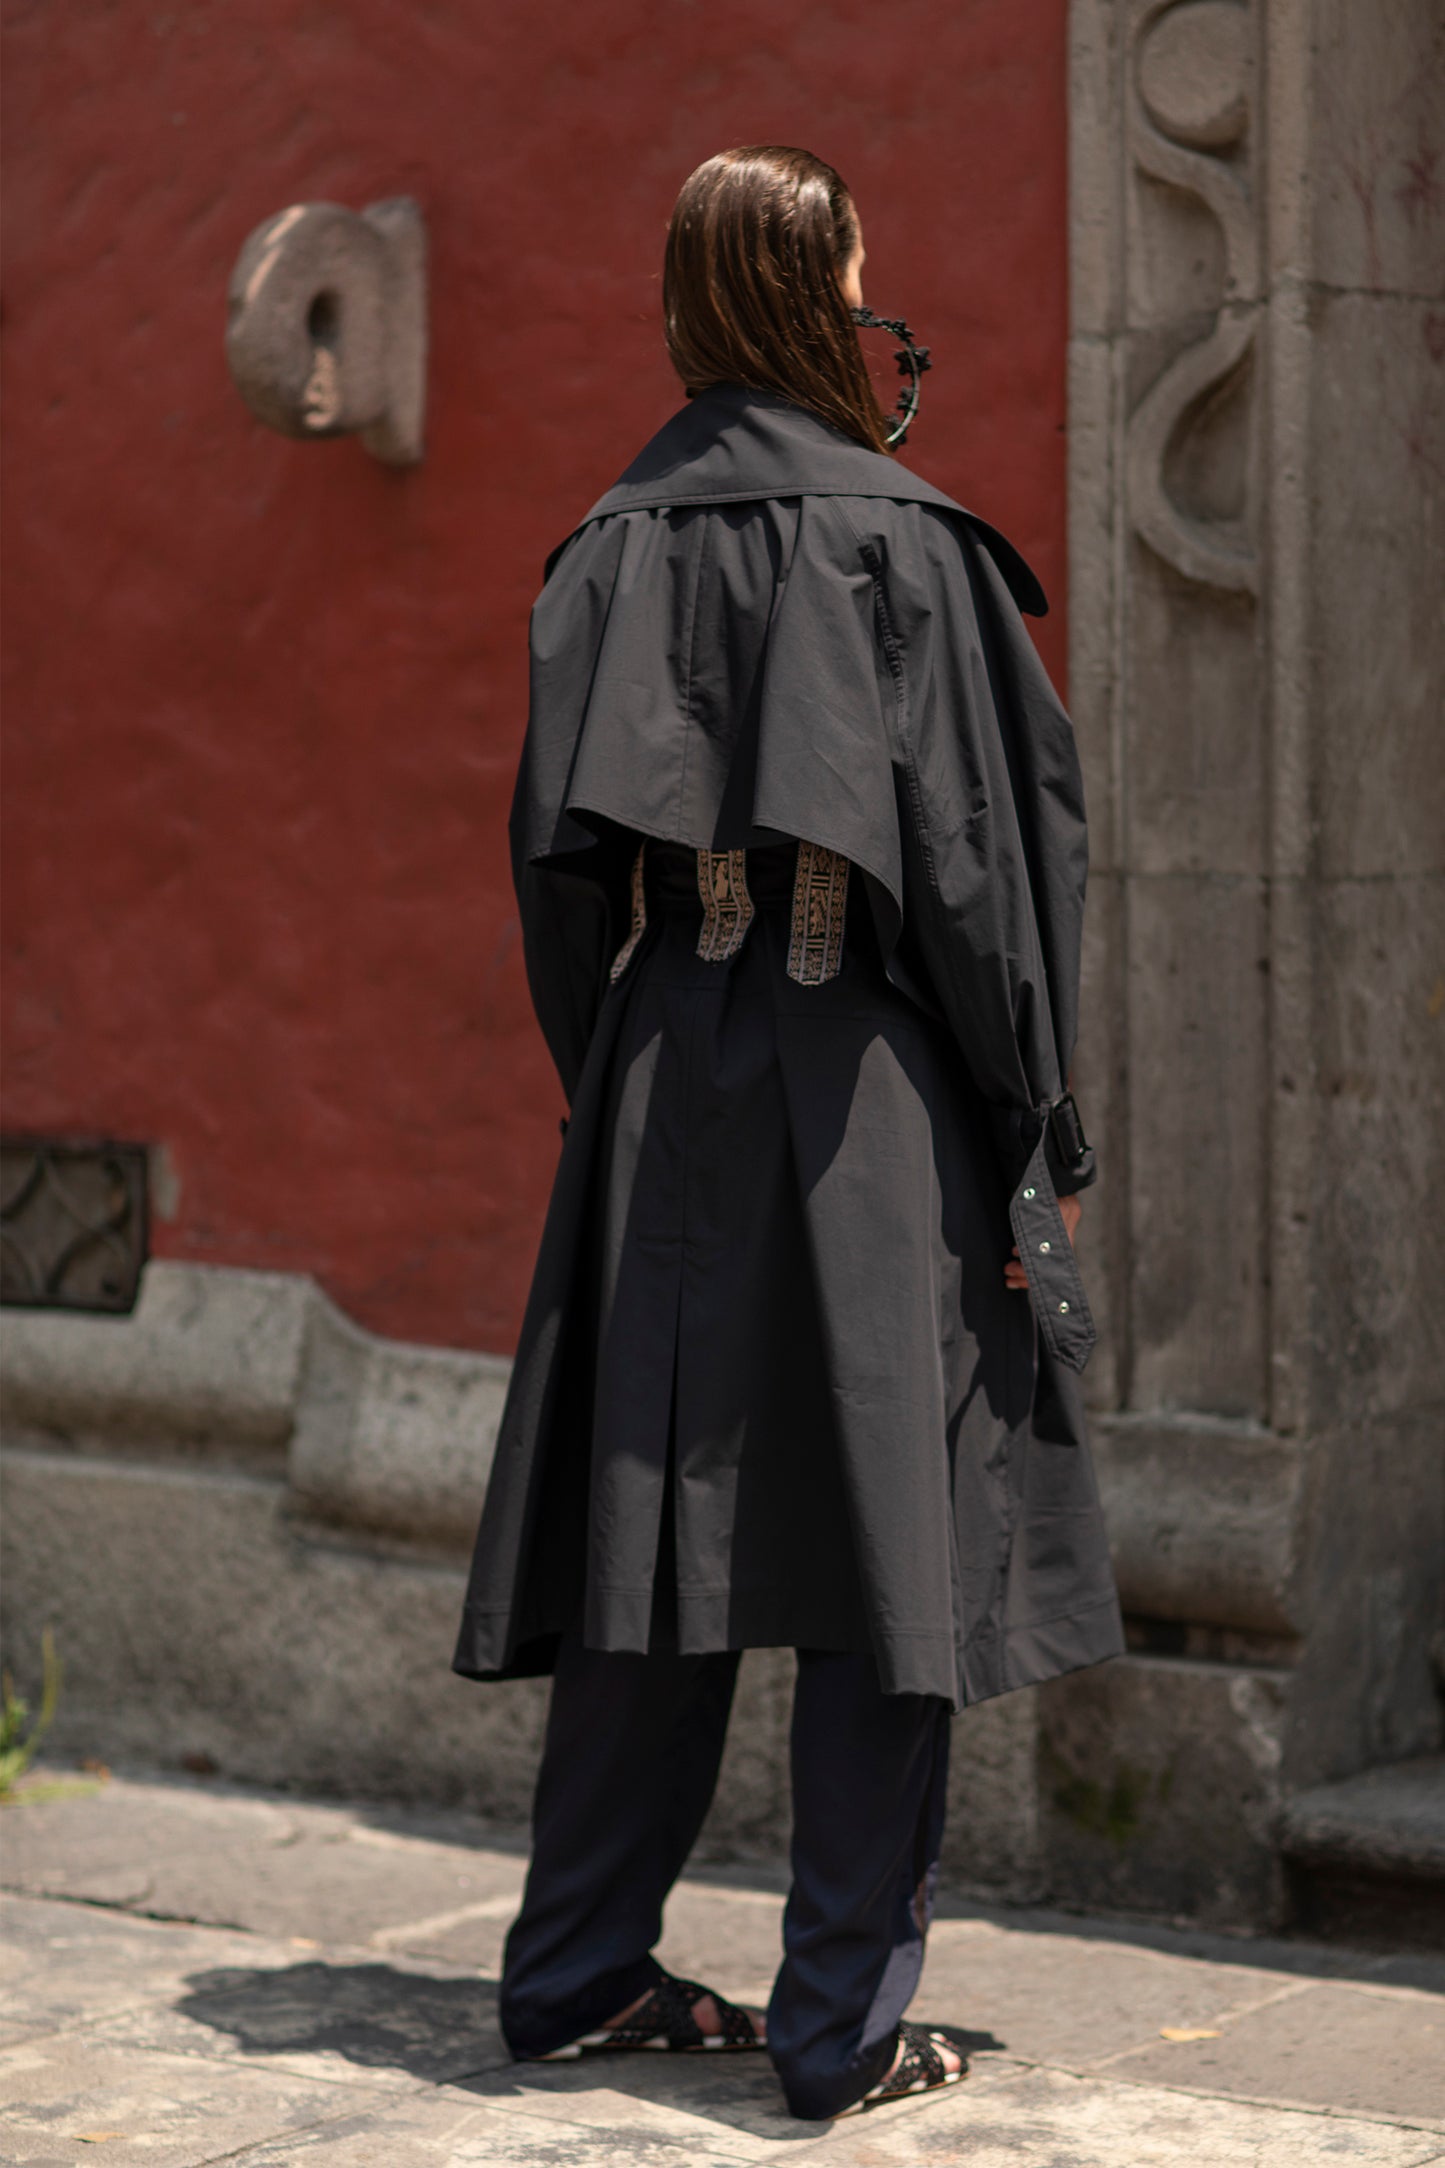 Weather cloth volume Trench coat with Purepecha artisan woven tape